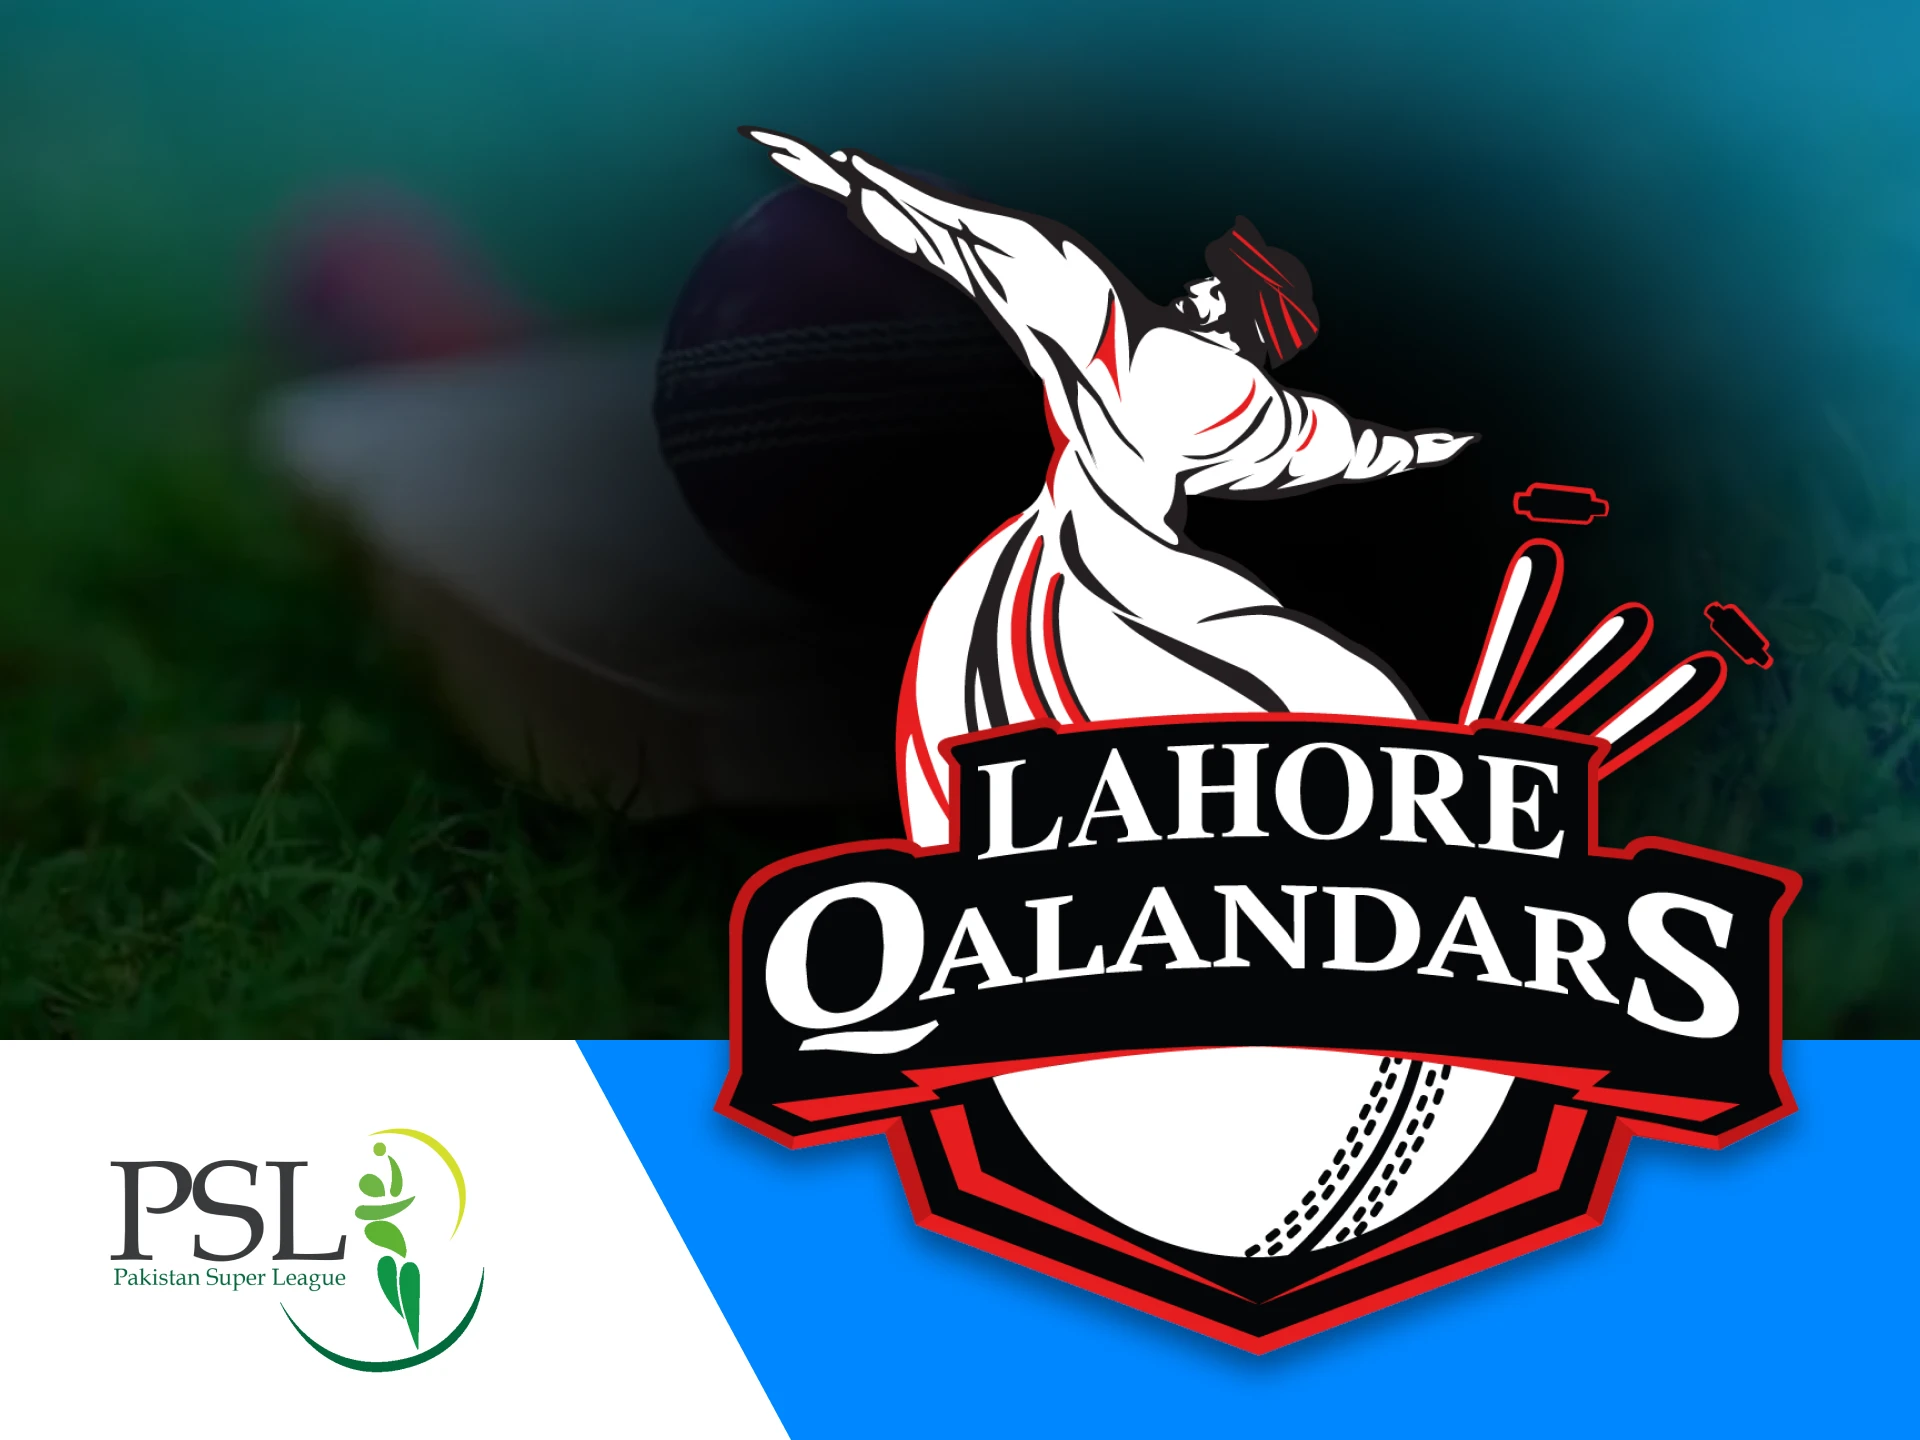 Lahore Qalandars competes in the PSL on behalf of the city of Lahore.